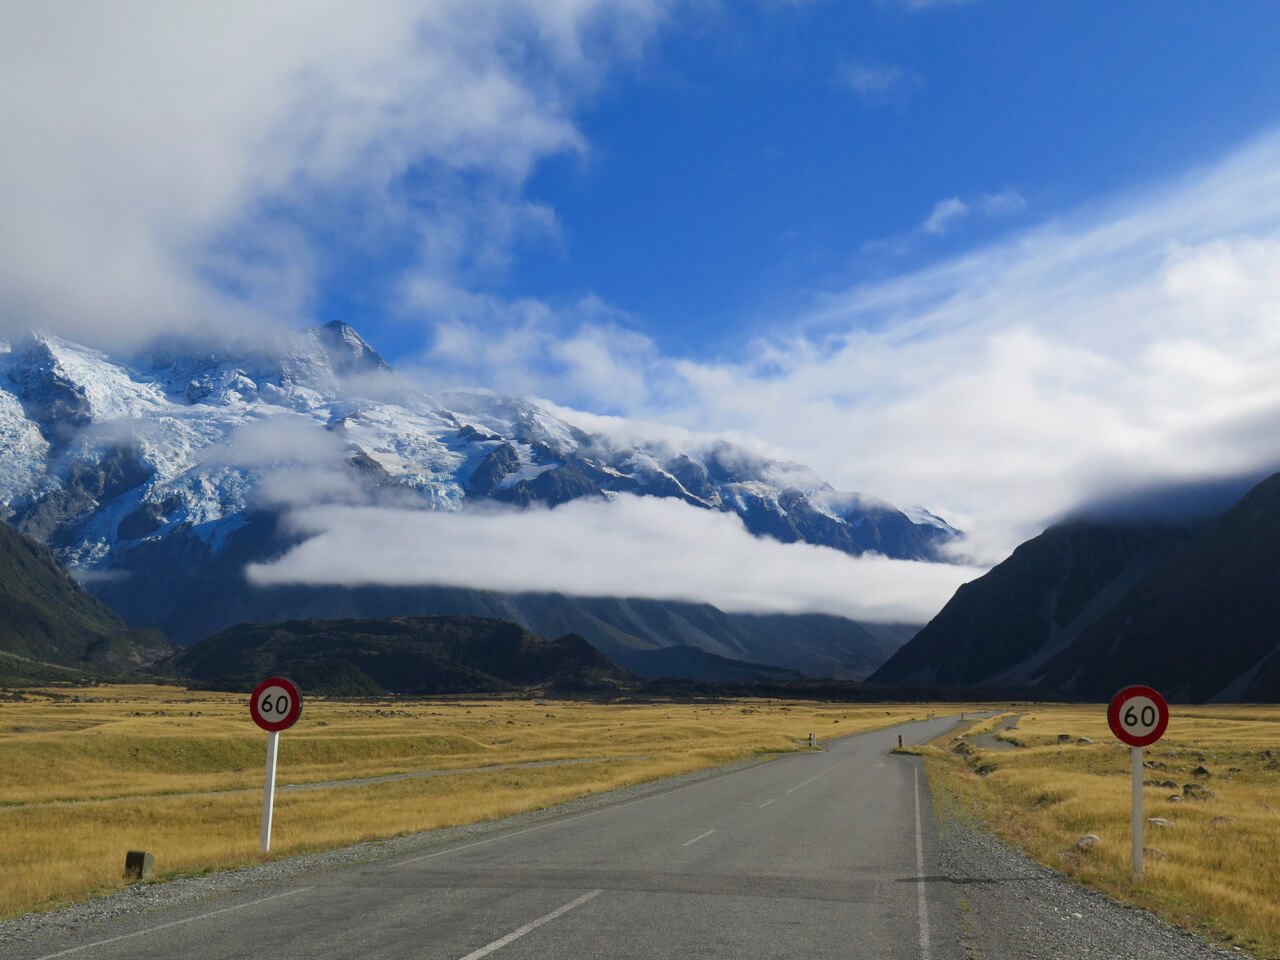 A few clouds and mostly blue sky on the road to Mount Cook, New Zealand. ©KettiWilhelm2016